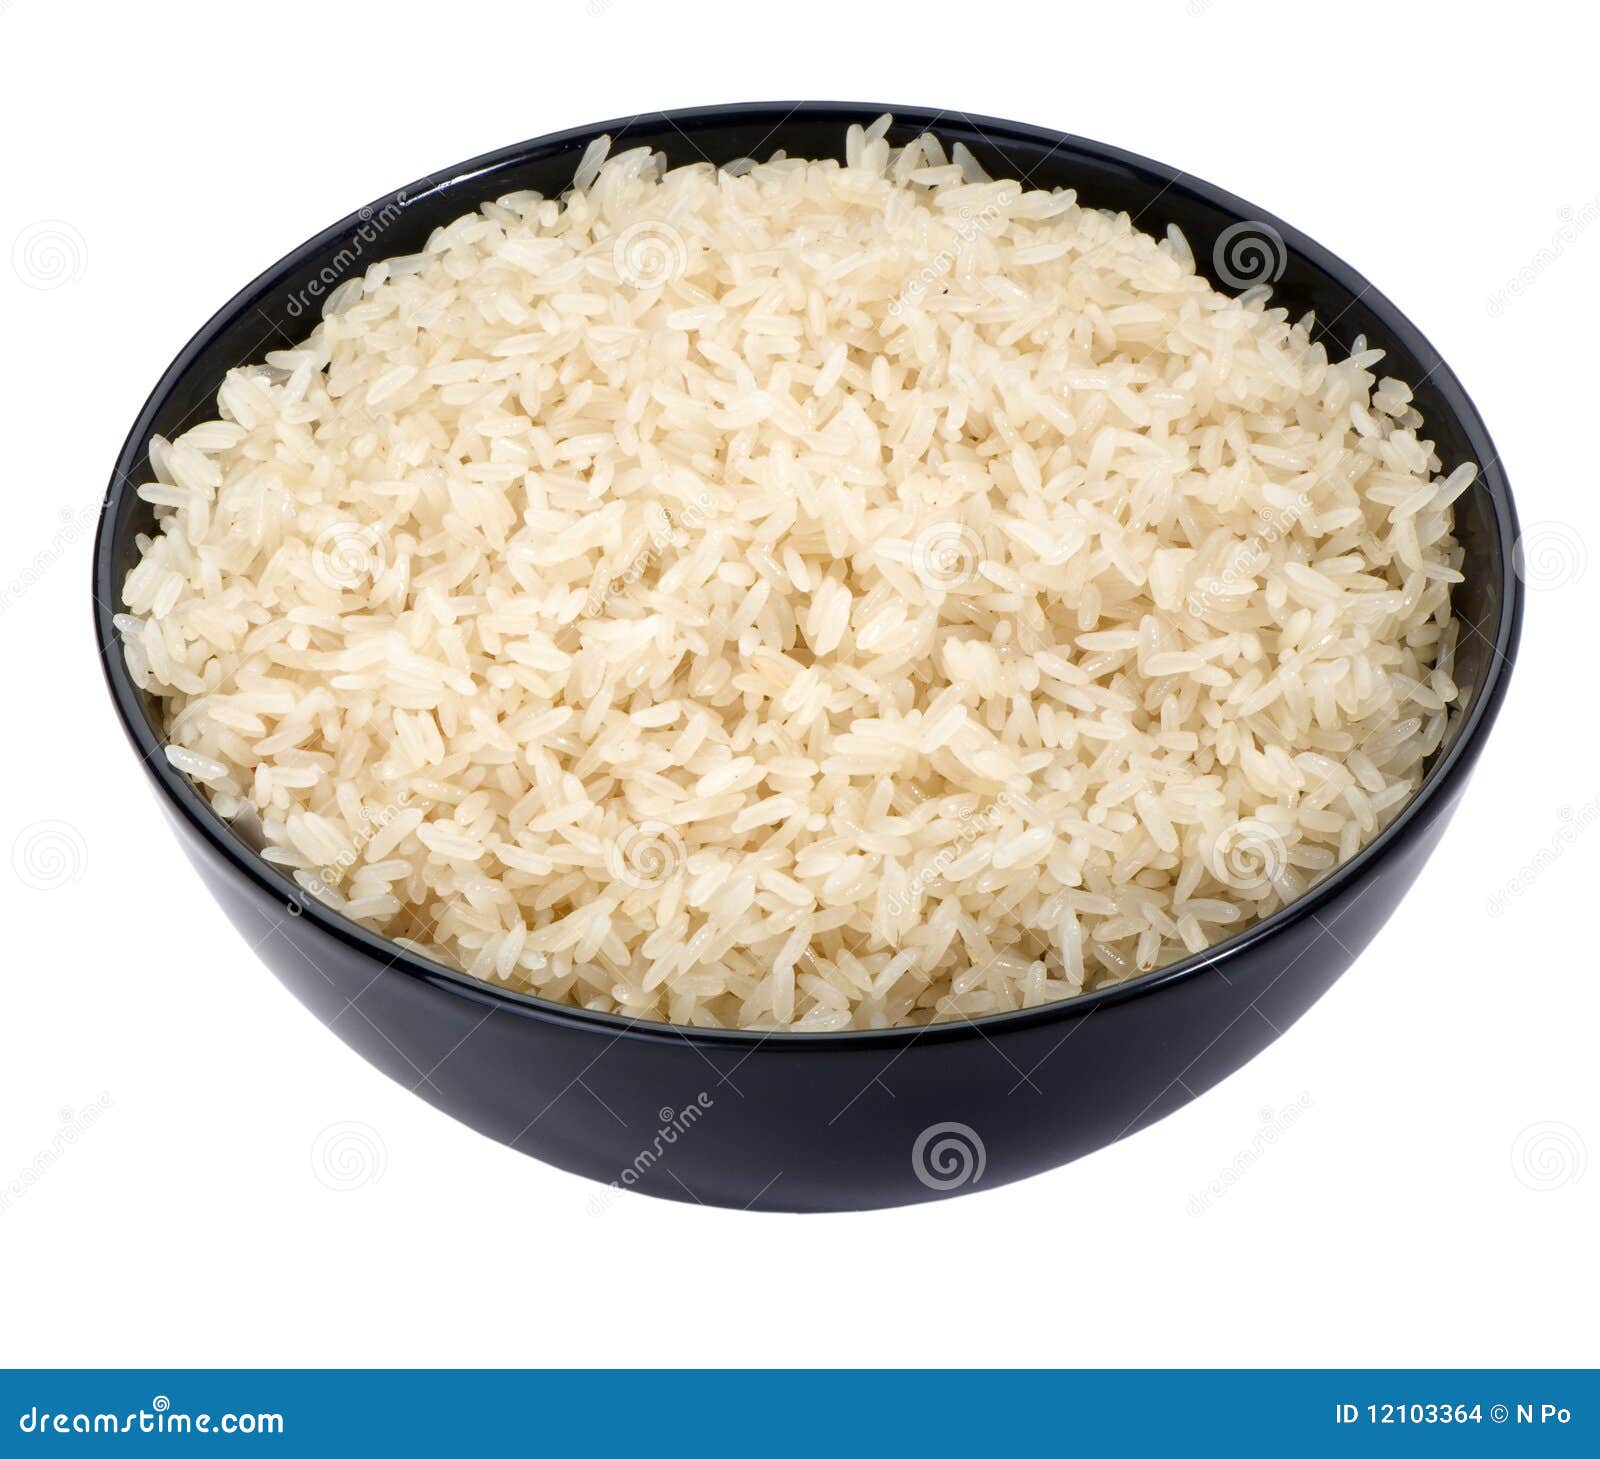 boiled rice in a black bowl close-up 